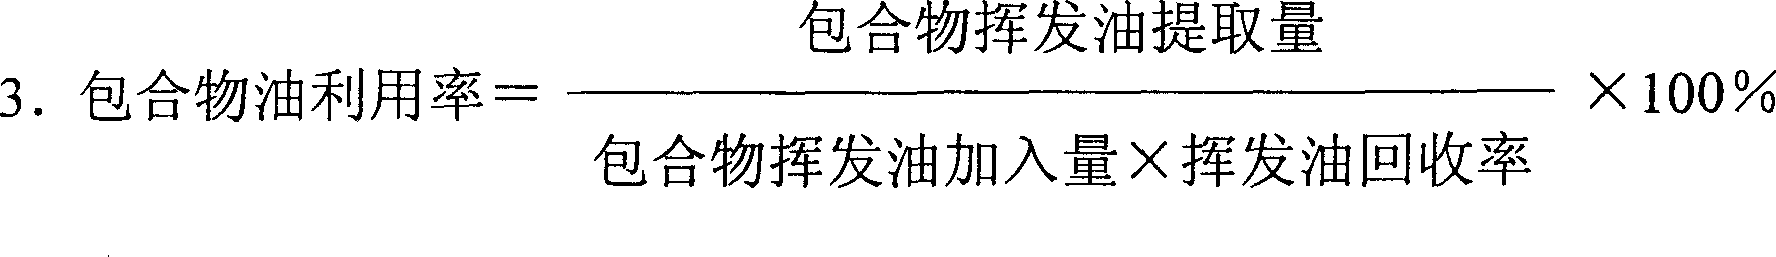 Method for preparing Chinese traditional medicine of treating abscess, lymphadenitis, and pus and ulcer in cold nature